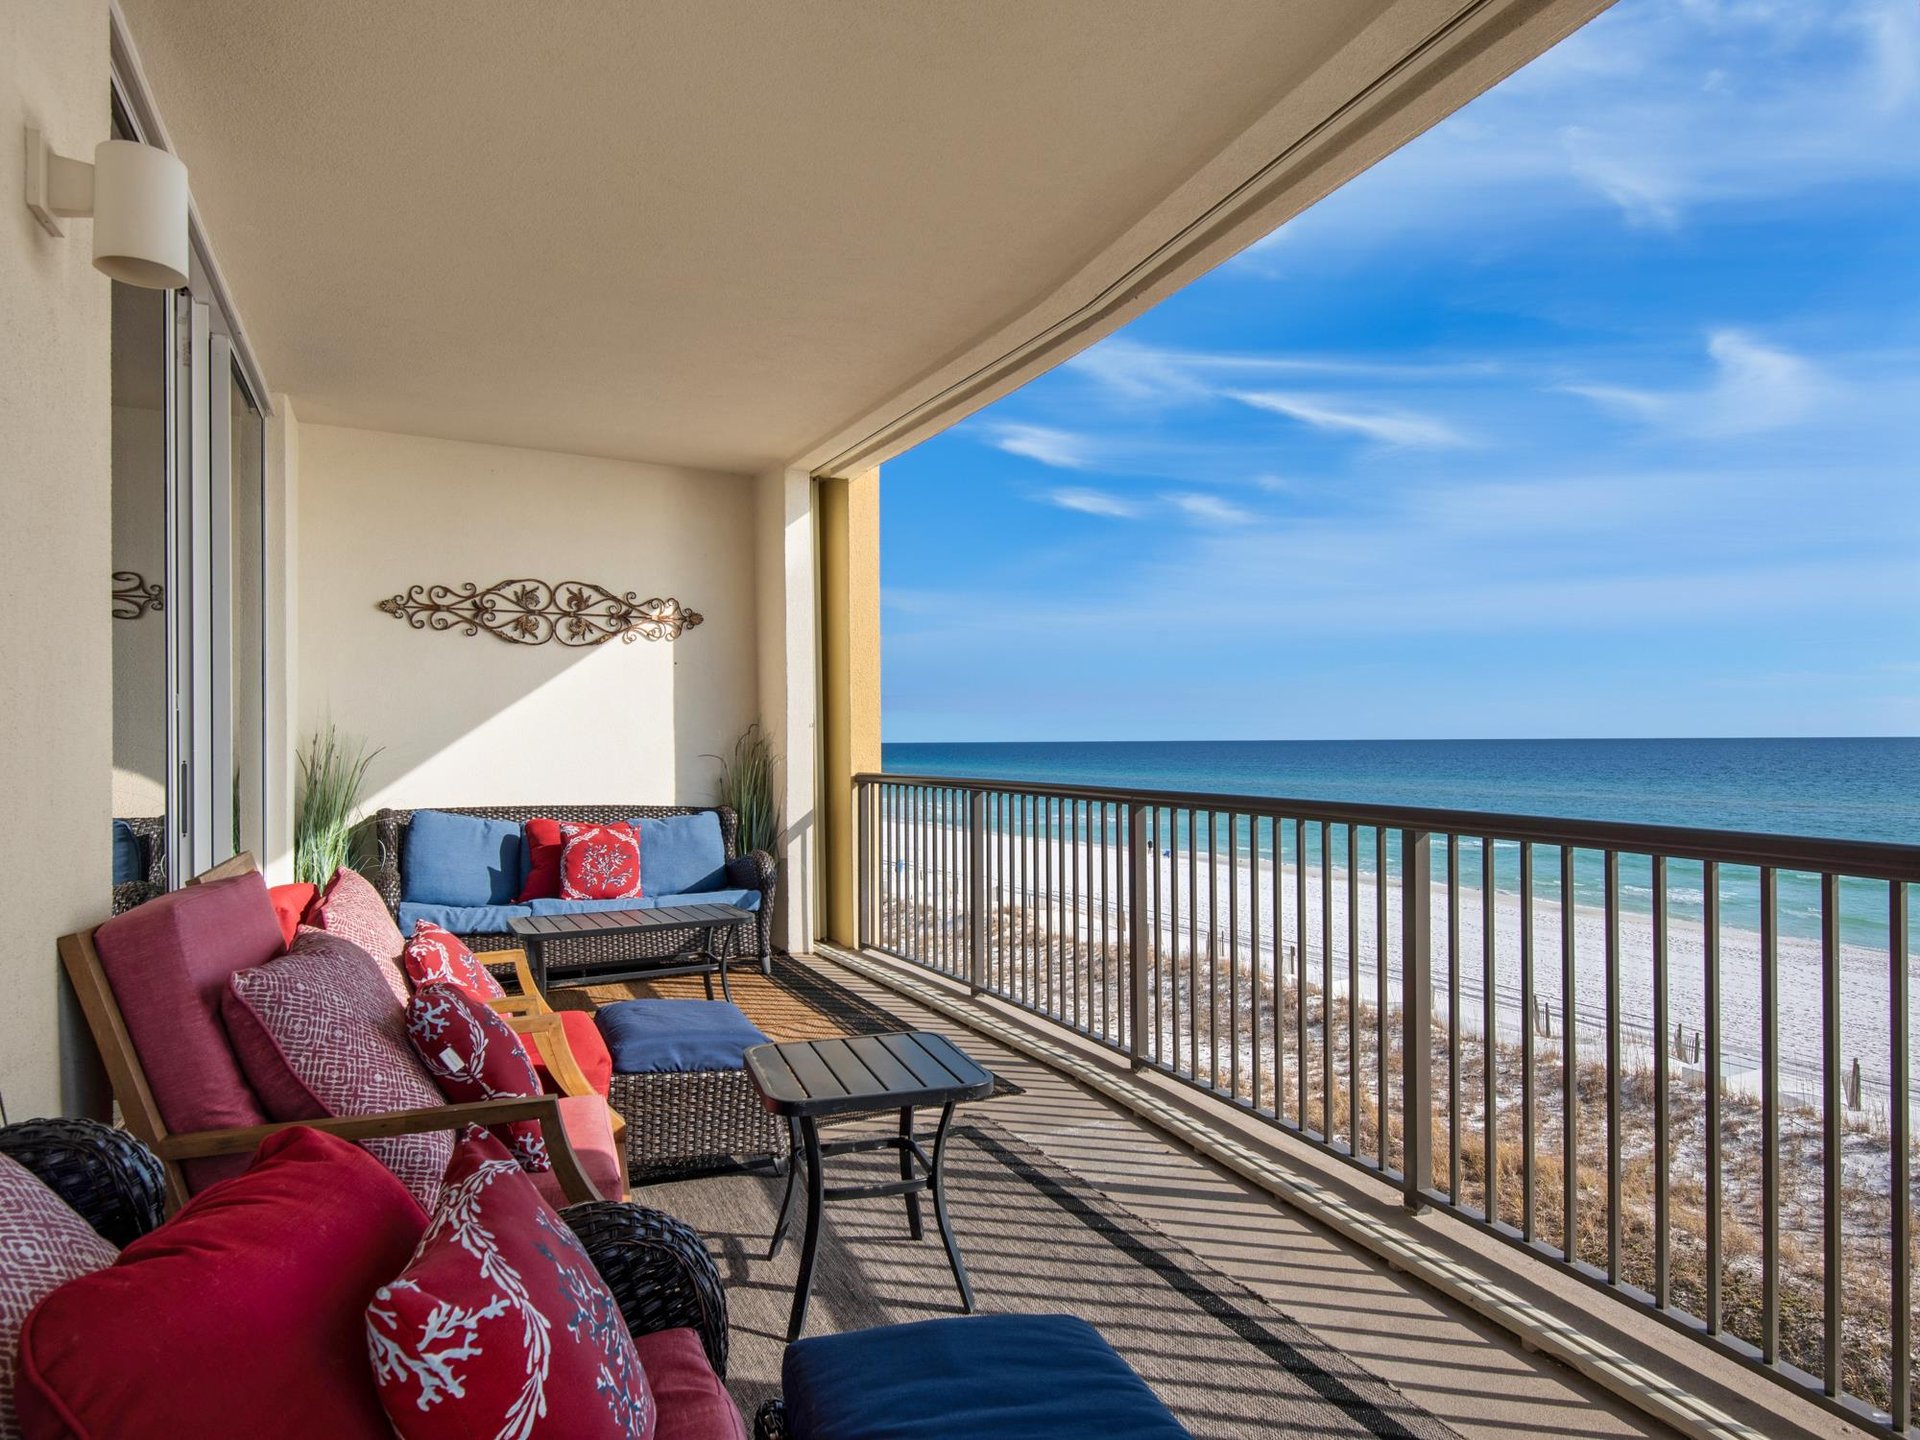 Sit back and enjoy the View on this Generous Private Balcony